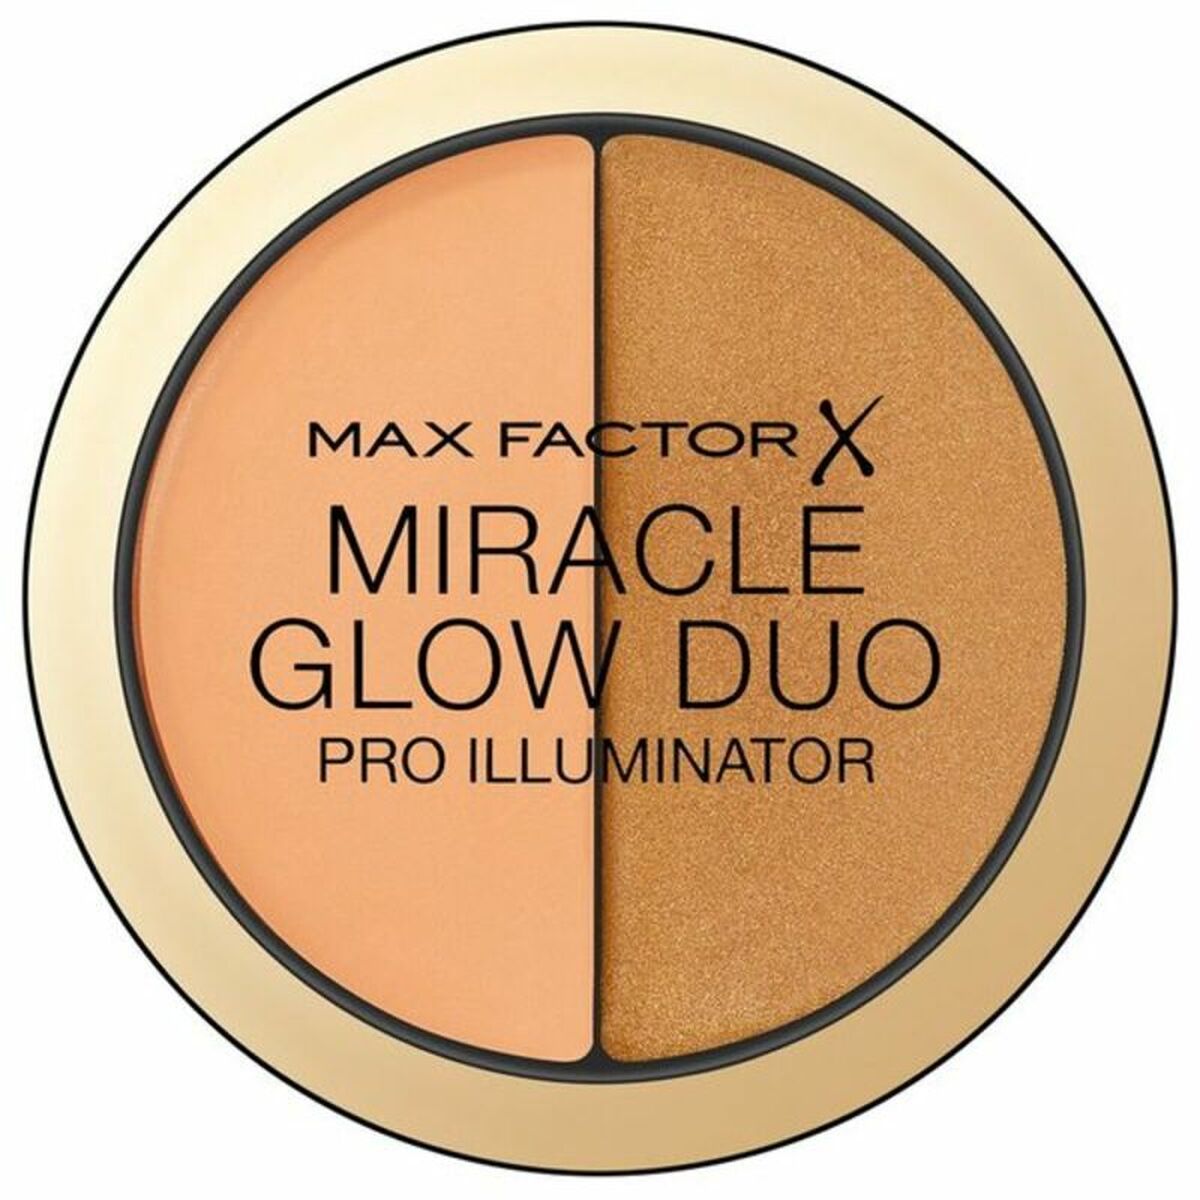 HILLIGHTER MIRACLE GLOW DUO MAX Factor